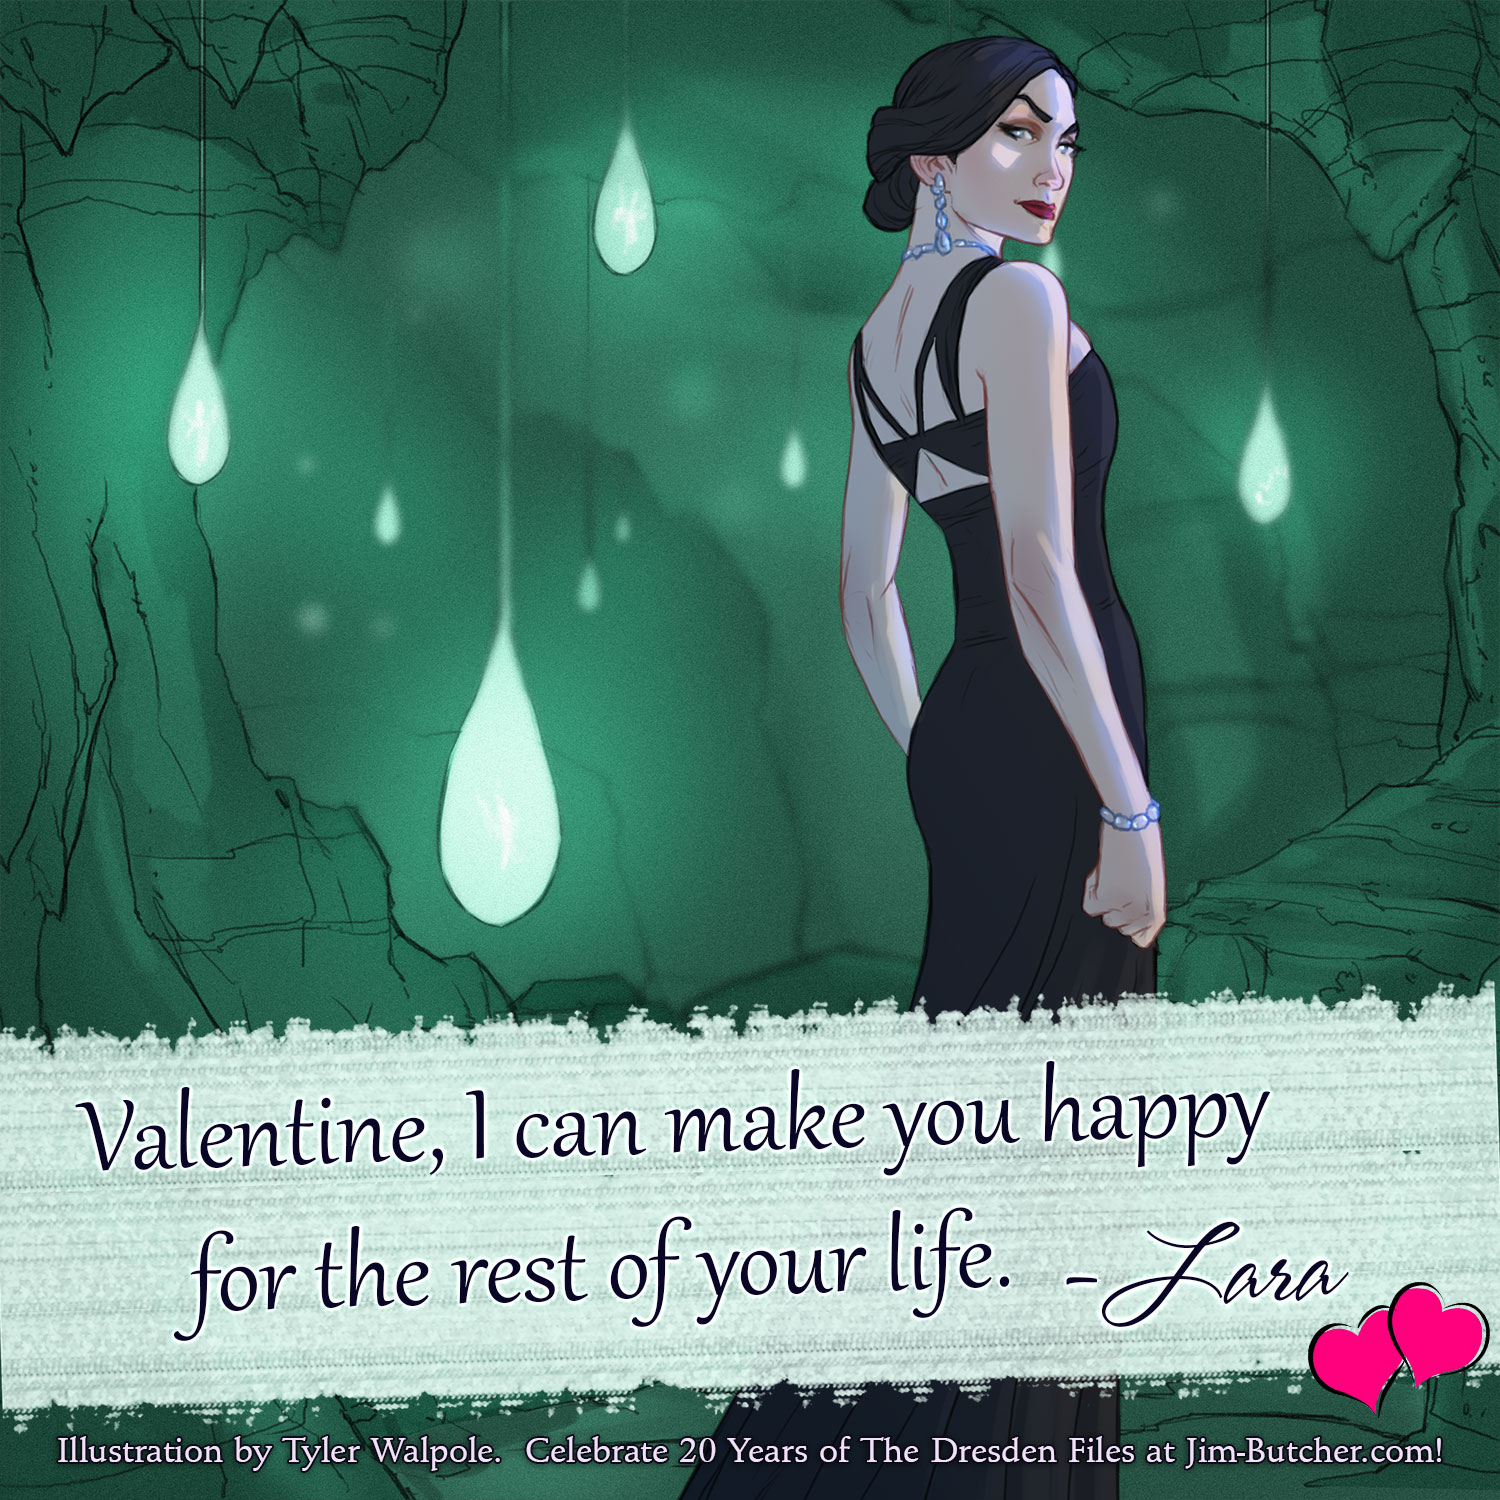 Lara: Valentine, I can make you happy for the rest of your life.